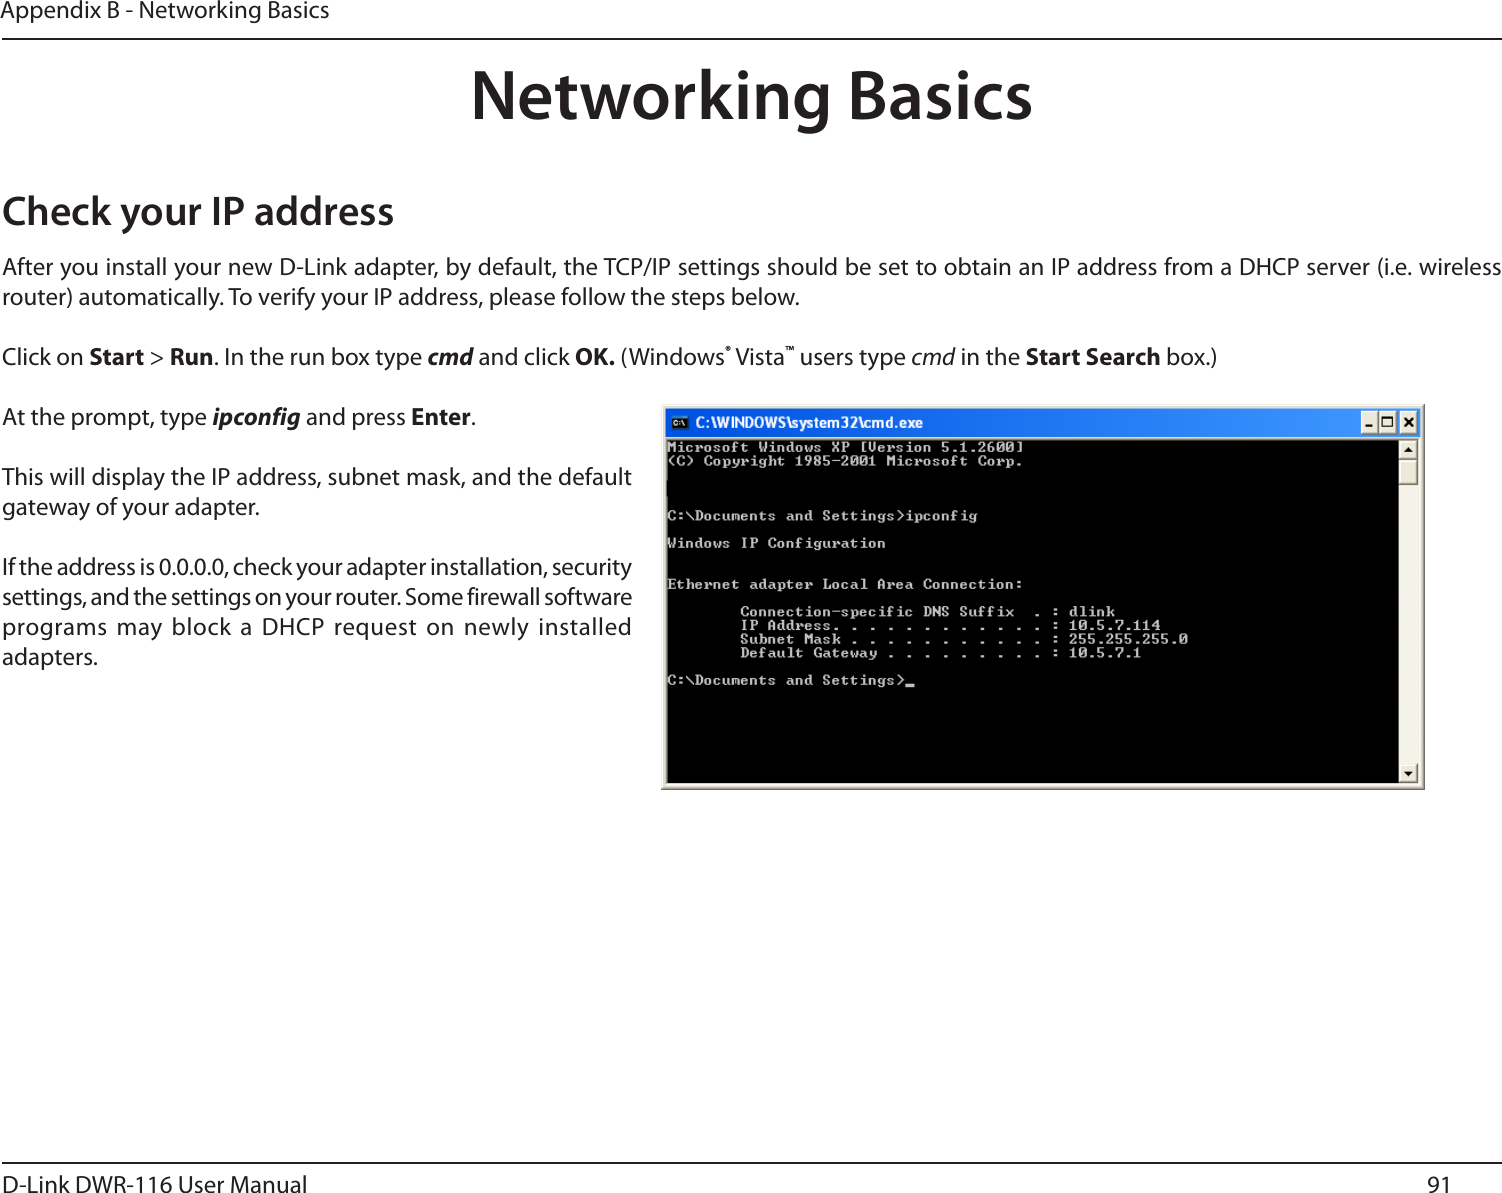 91D-Link DWR-116 User ManualAppendix B - Networking BasicsNetworking BasicsCheck your IP addressAfter you install your new D-Link adapter, by default, the TCP/IP settings should be set to obtain an IP address from a DHCP server (i.e. wireless router) automatically. To verify your IP address, please follow the steps below.Click on Start &gt; Run. In the run box type cmd and click OK. (Windows® Vista™ users type cmd in the Start Search box.)At the prompt, type ipconfig and press Enter.This will display the IP address, subnet mask, and the default gateway of your adapter.If the address is 0.0.0.0, check your adapter installation, security settings, and the settings on your router. Some firewall software programs may block  a DHCP request on newly installed adapters. 